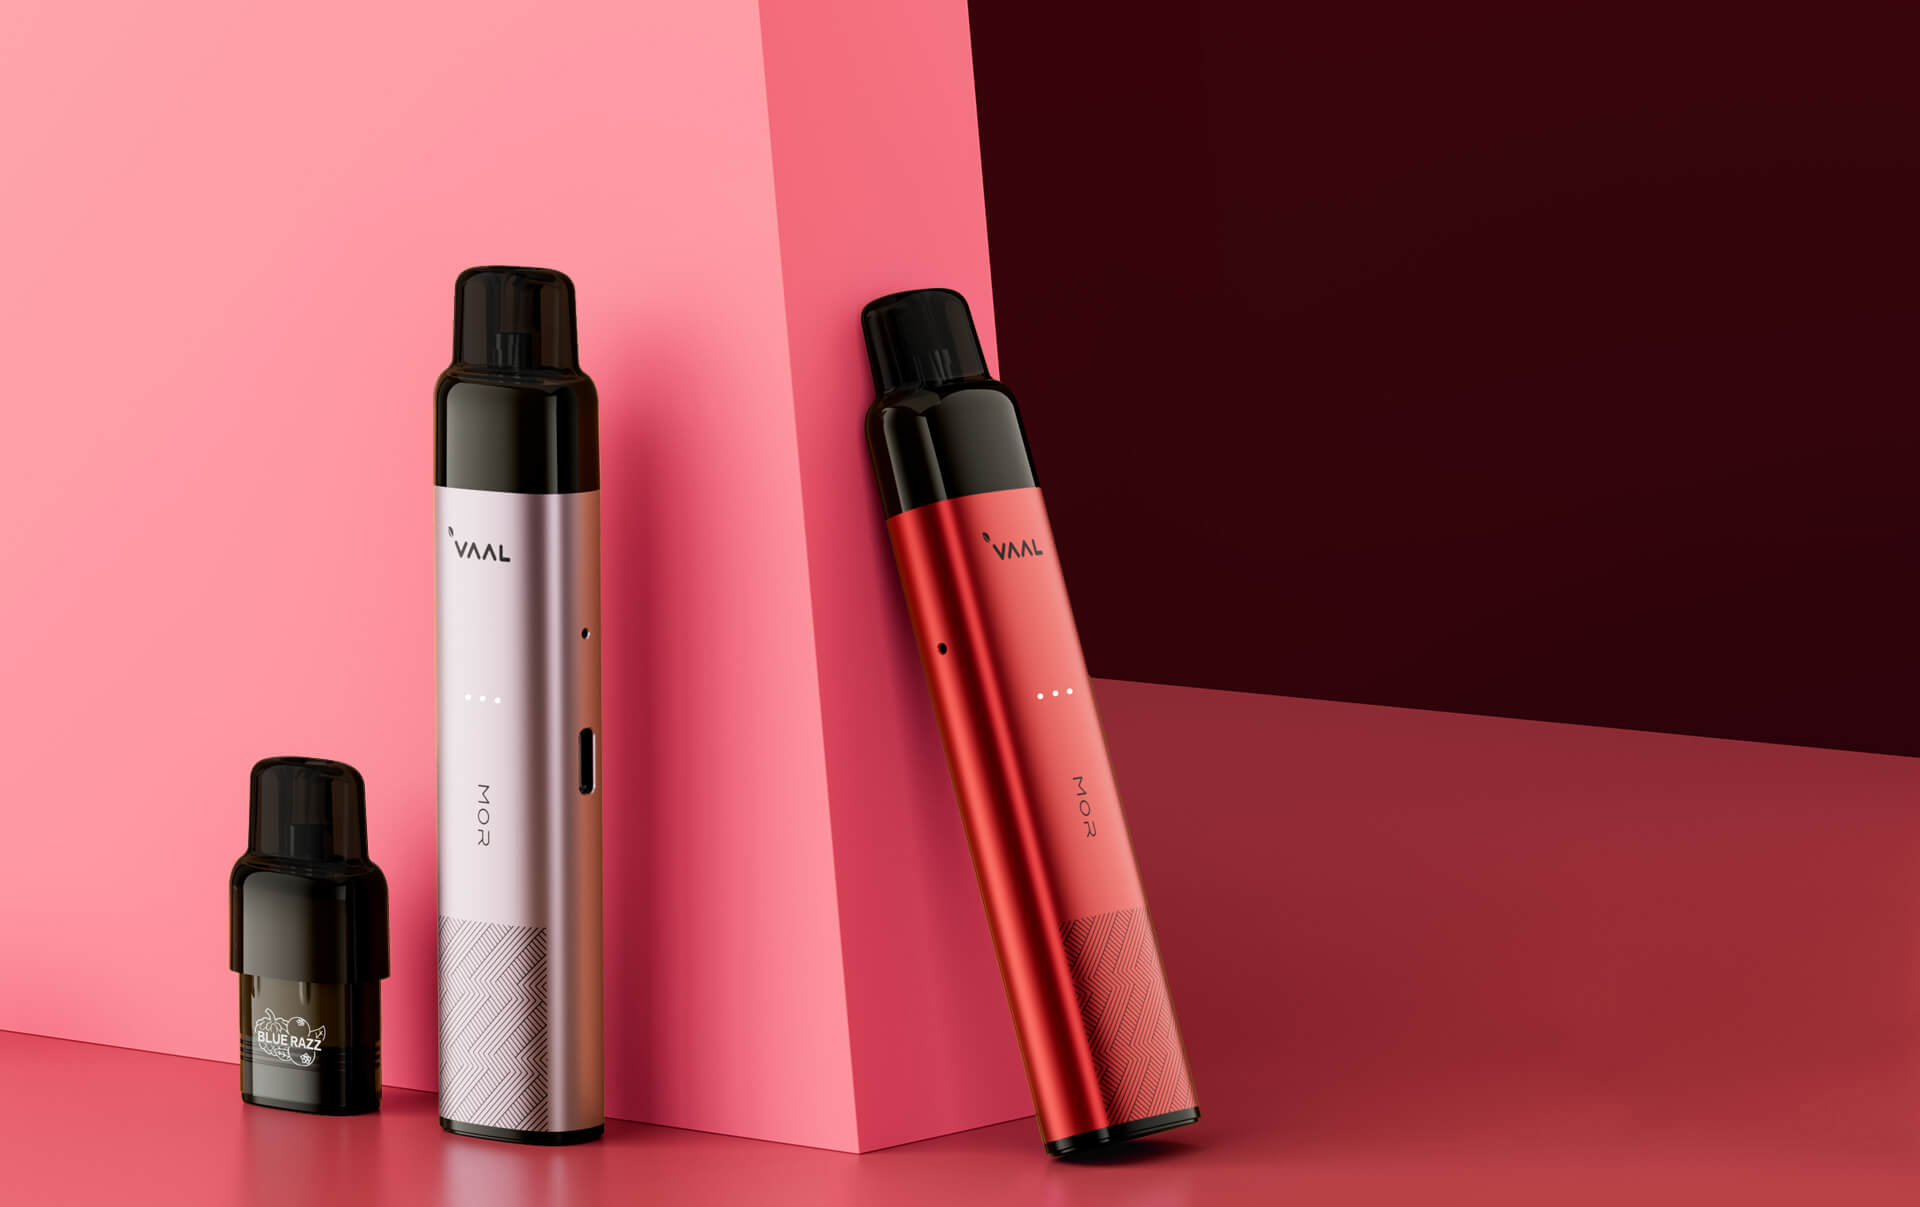 VAAL MOR features a replaceable POD system with 2ml e-liquid capacity, 1.2-ohm mesh coil, 900mAh rechargeable battery, compatibility with all Joyetech EVIO Grip pods, and a variety of pre-filled e-liquid flavors for a versatile vaping experience.